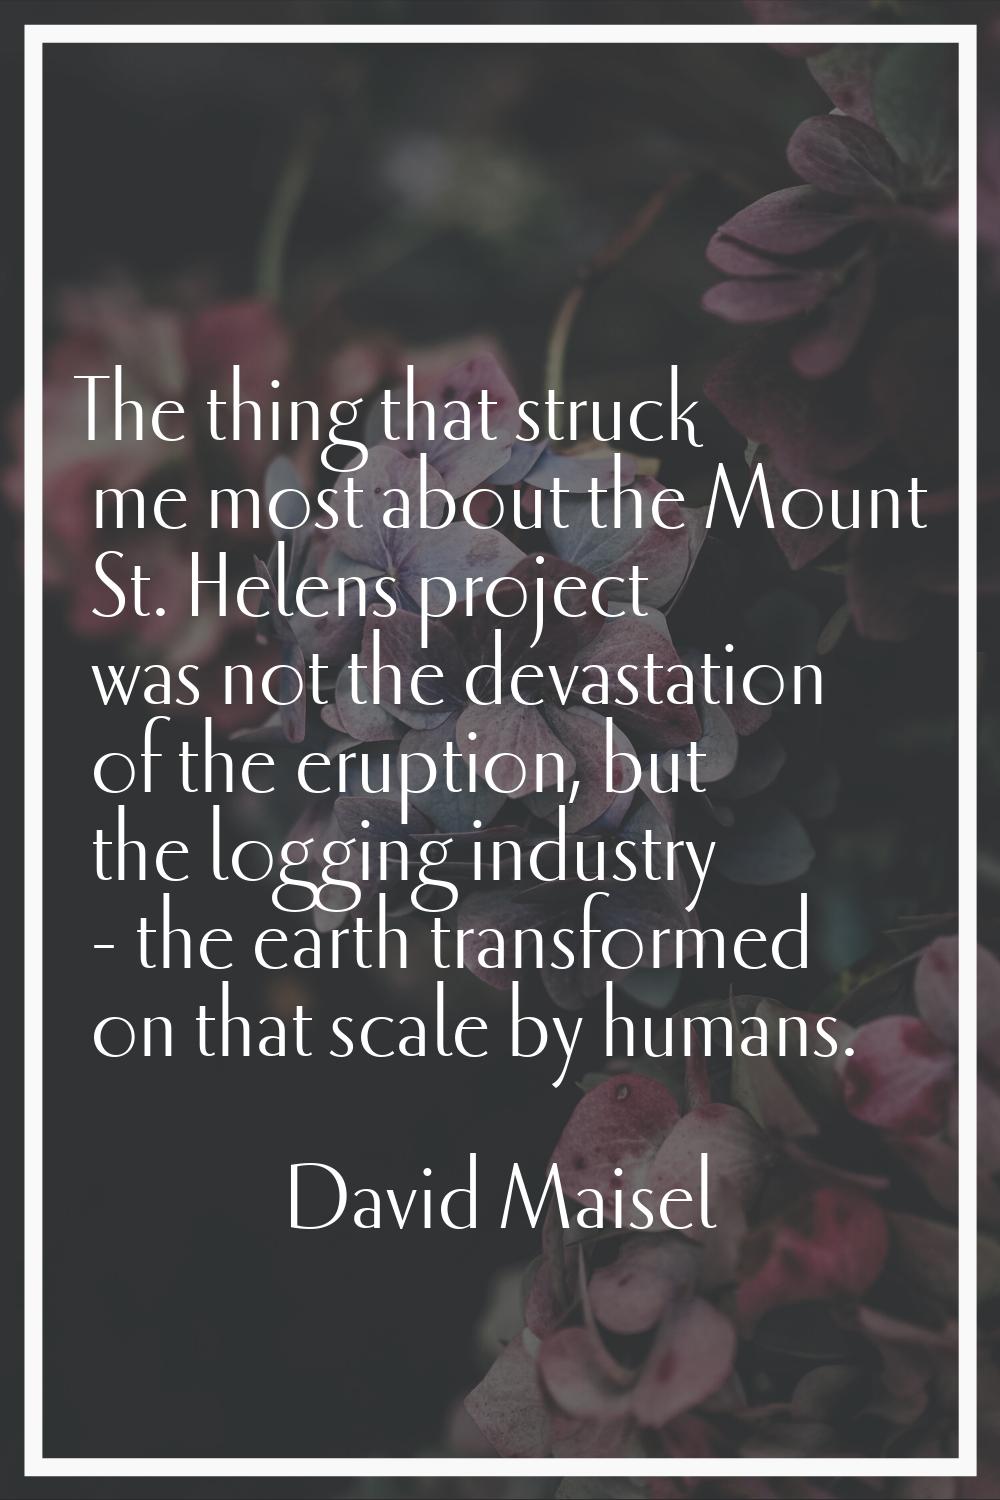 The thing that struck me most about the Mount St. Helens project was not the devastation of the eru